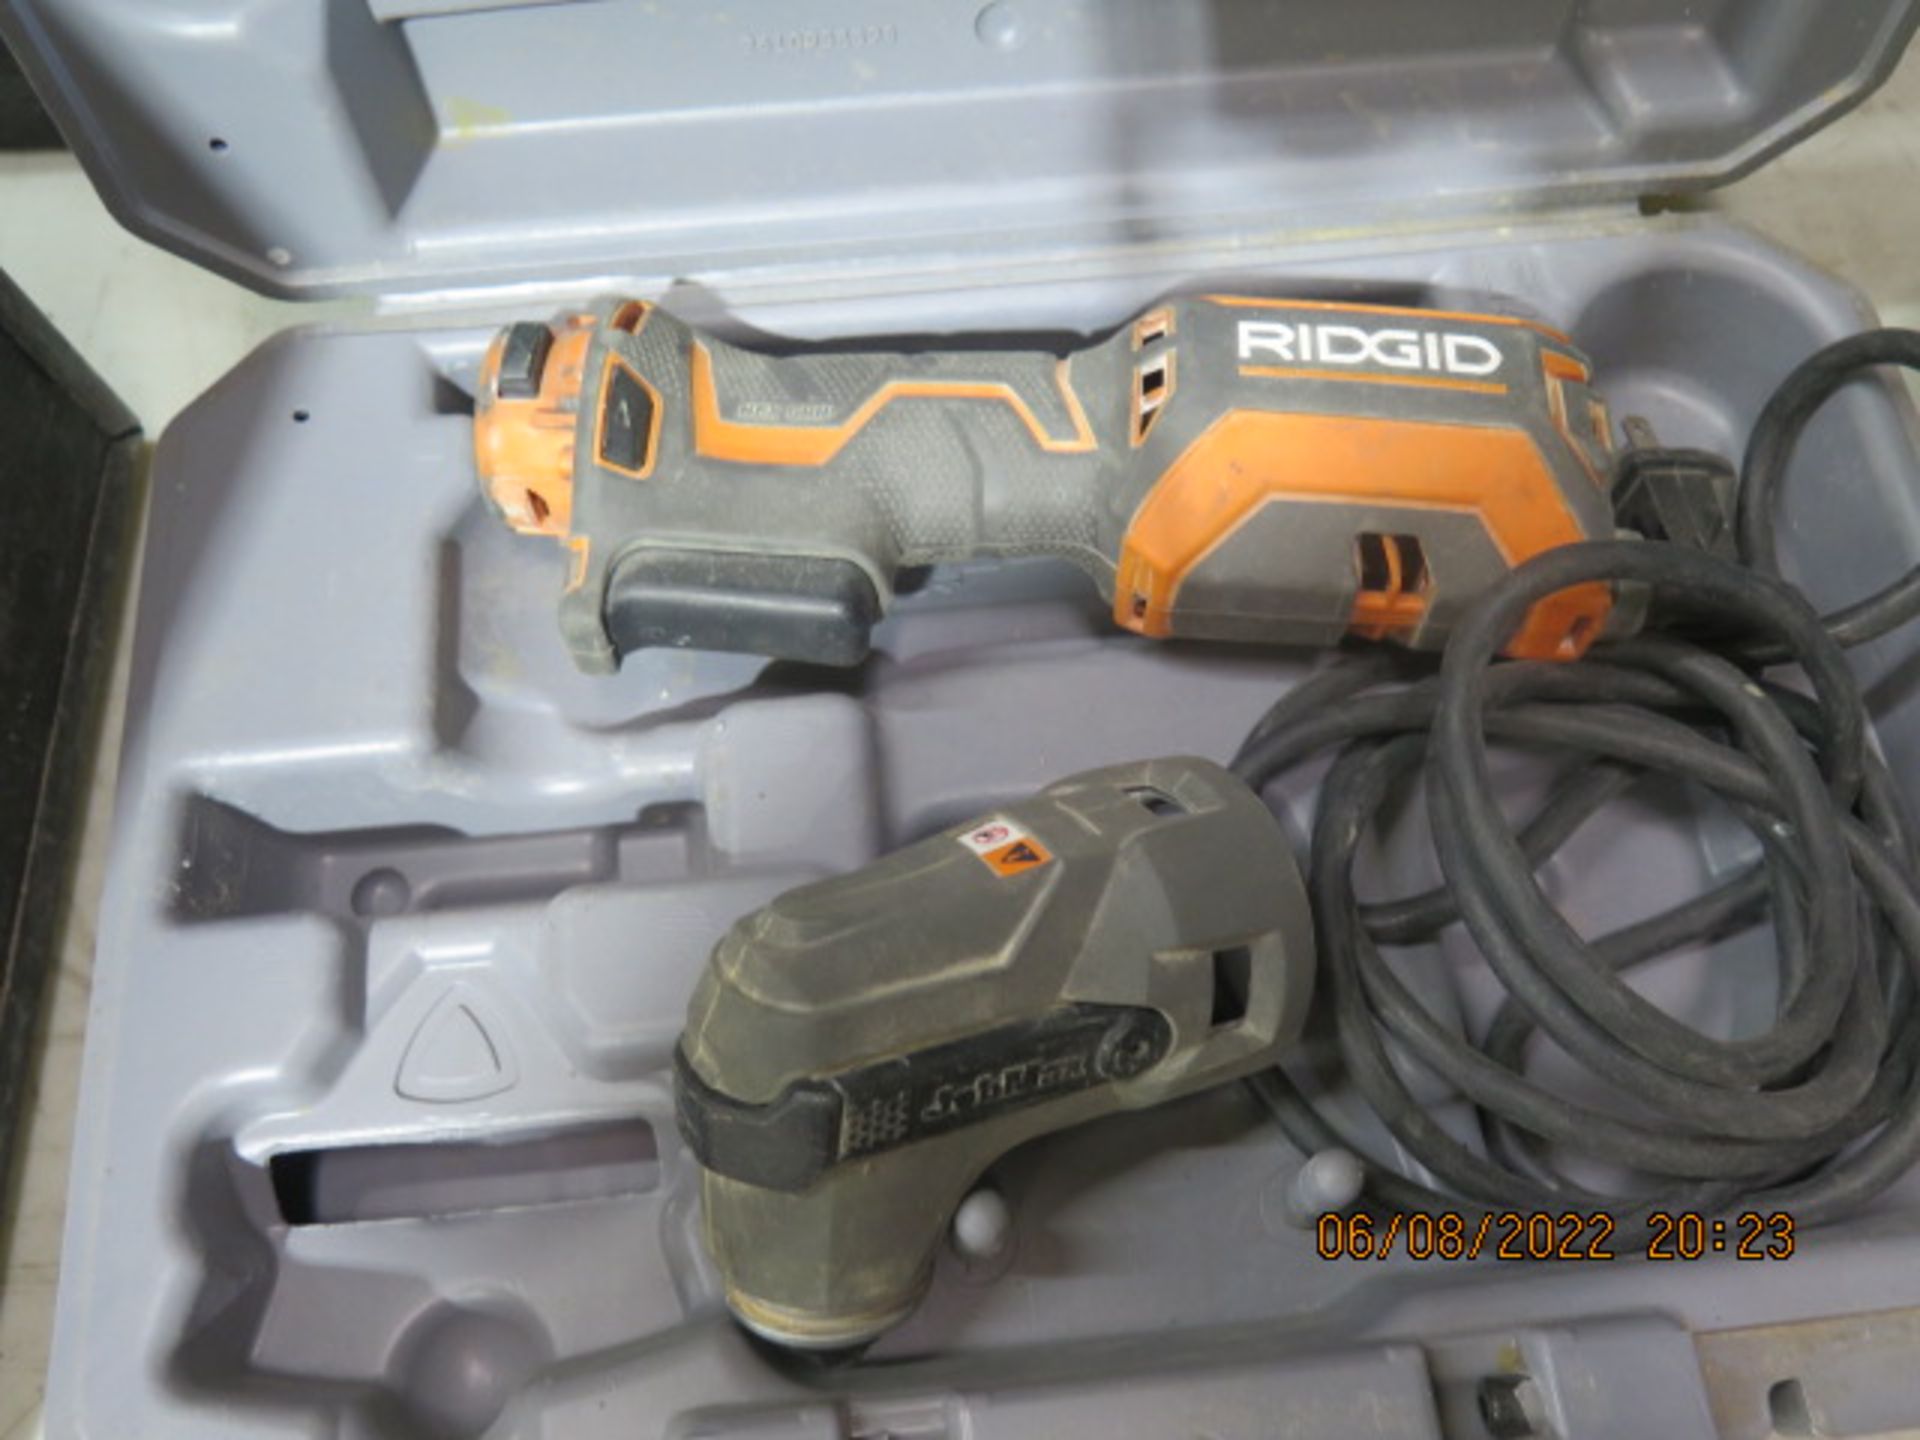 Ridgid R2851 Multi-Tool (SOLD AS-IS - NO WARRANTY) - Image 2 of 5